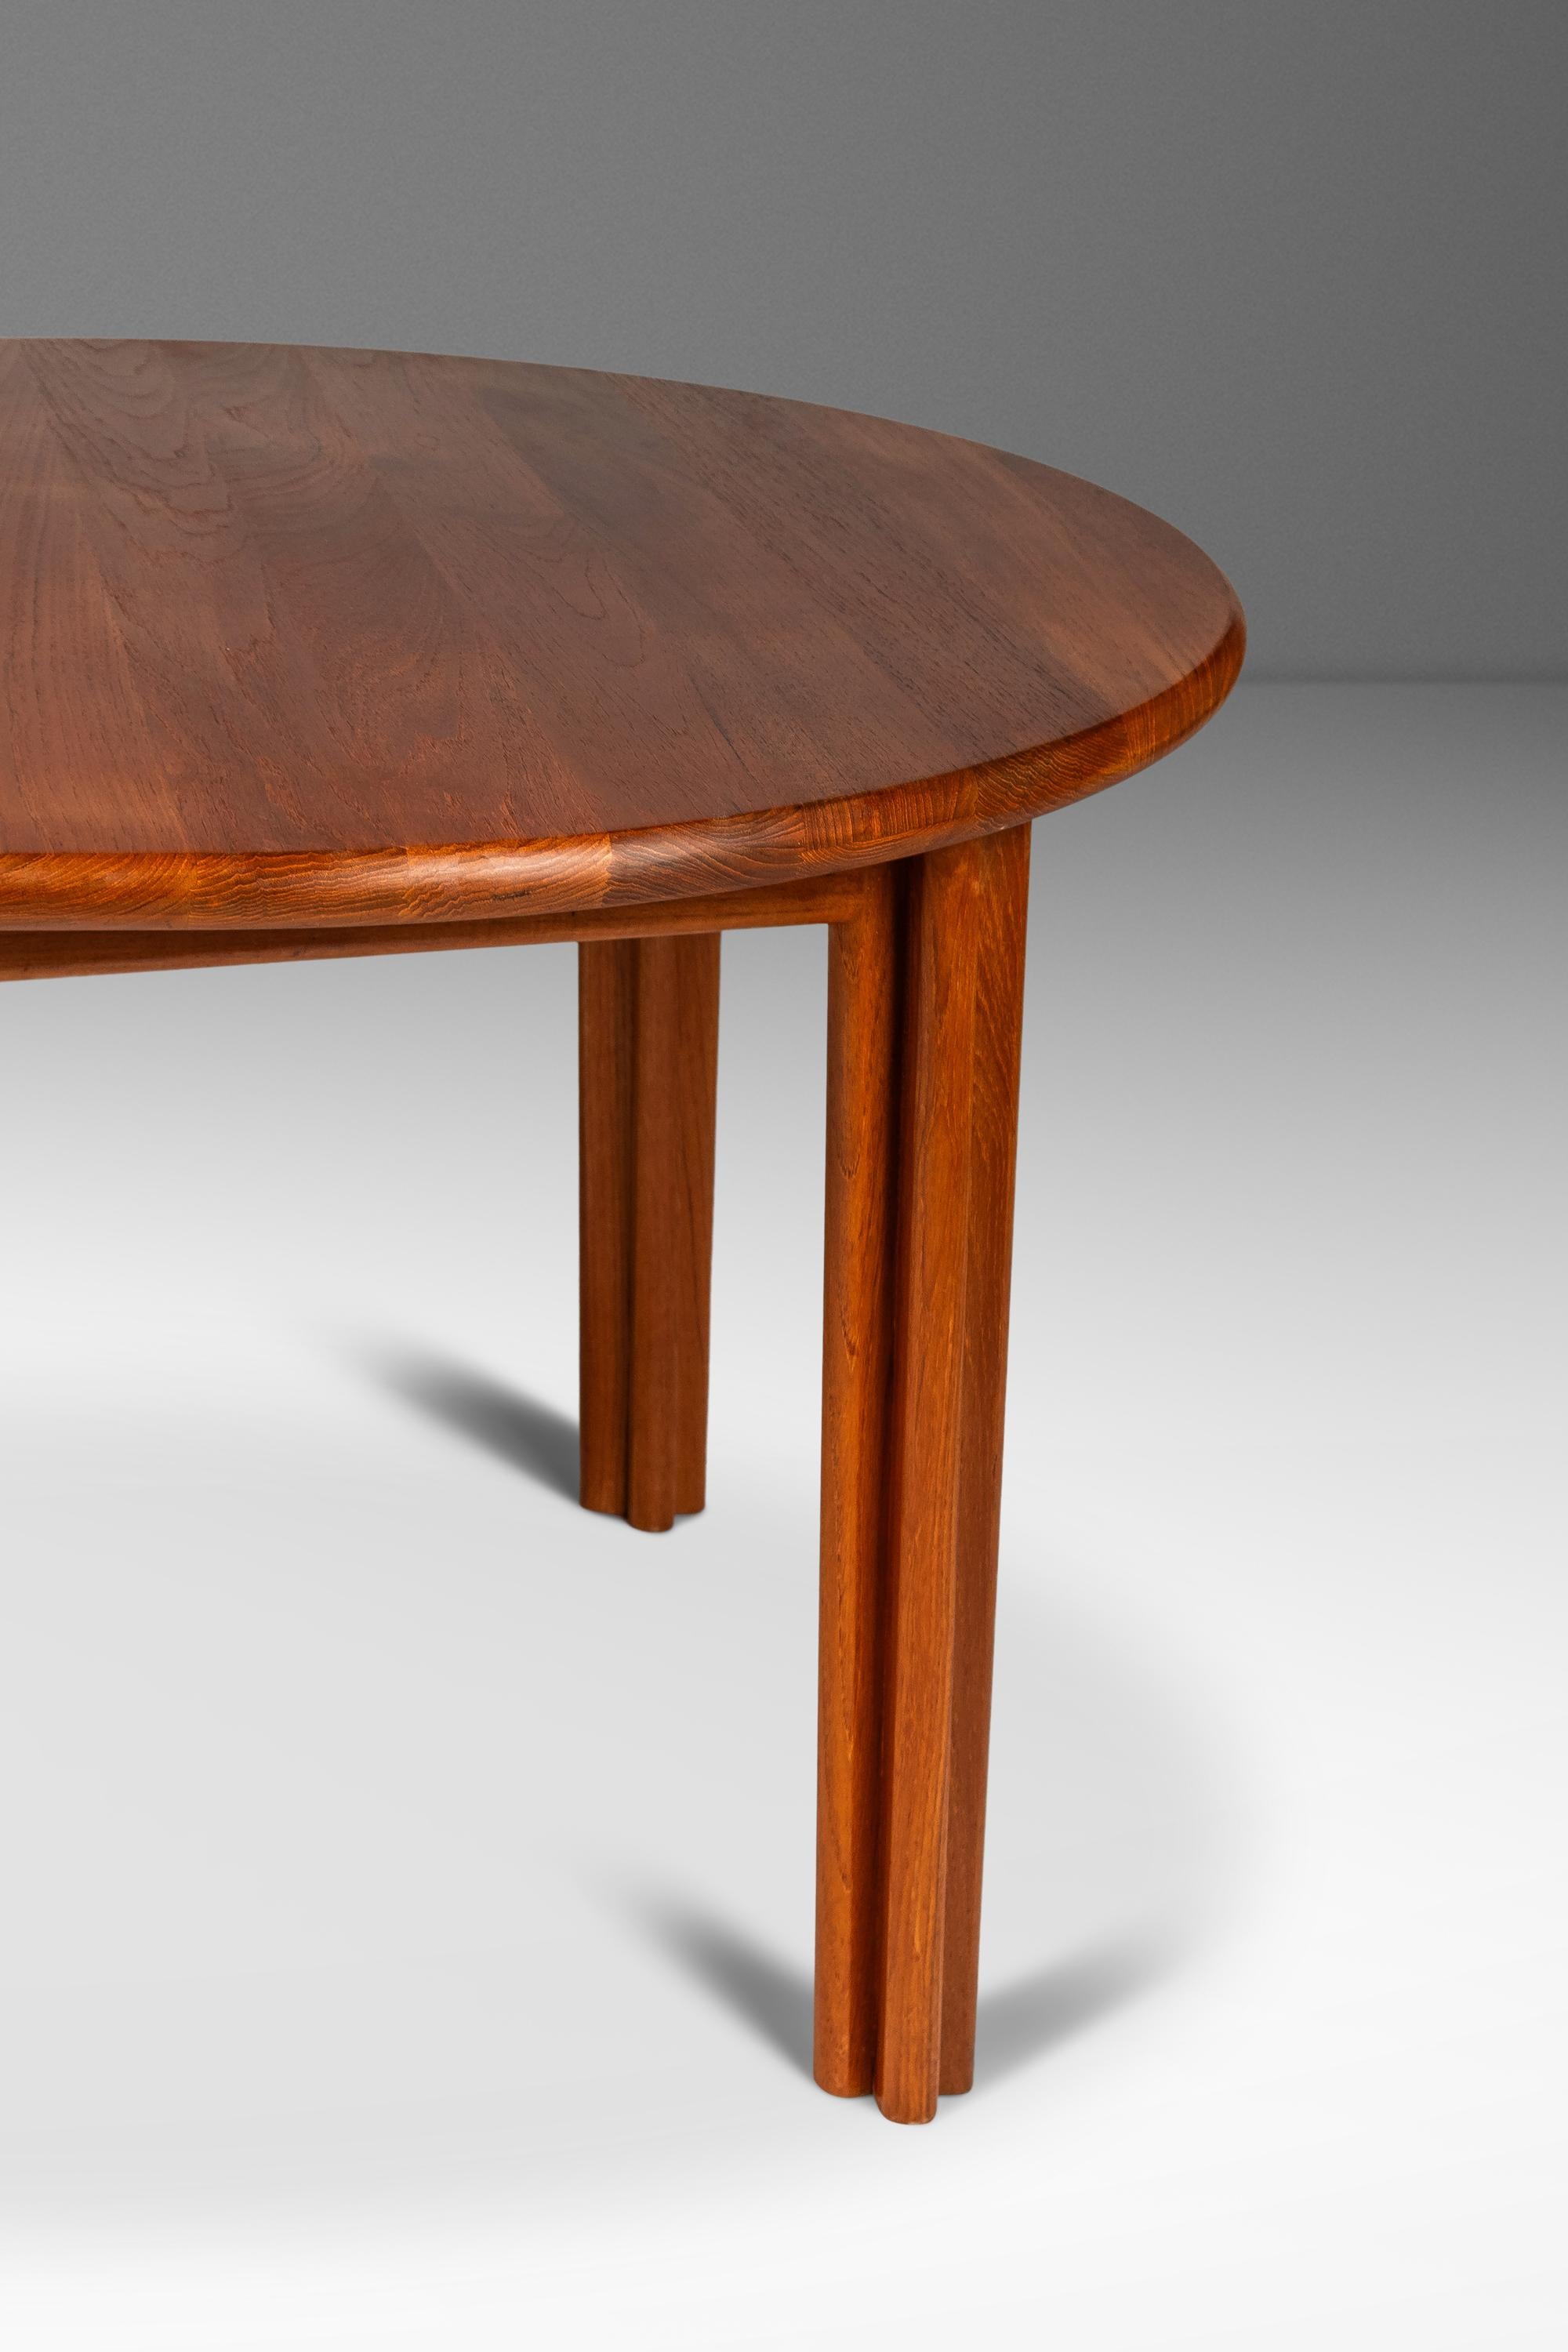 Mid-Century Modern Teak Extension Dining Table by Benny Linden, 2 Leaves, 1970 9